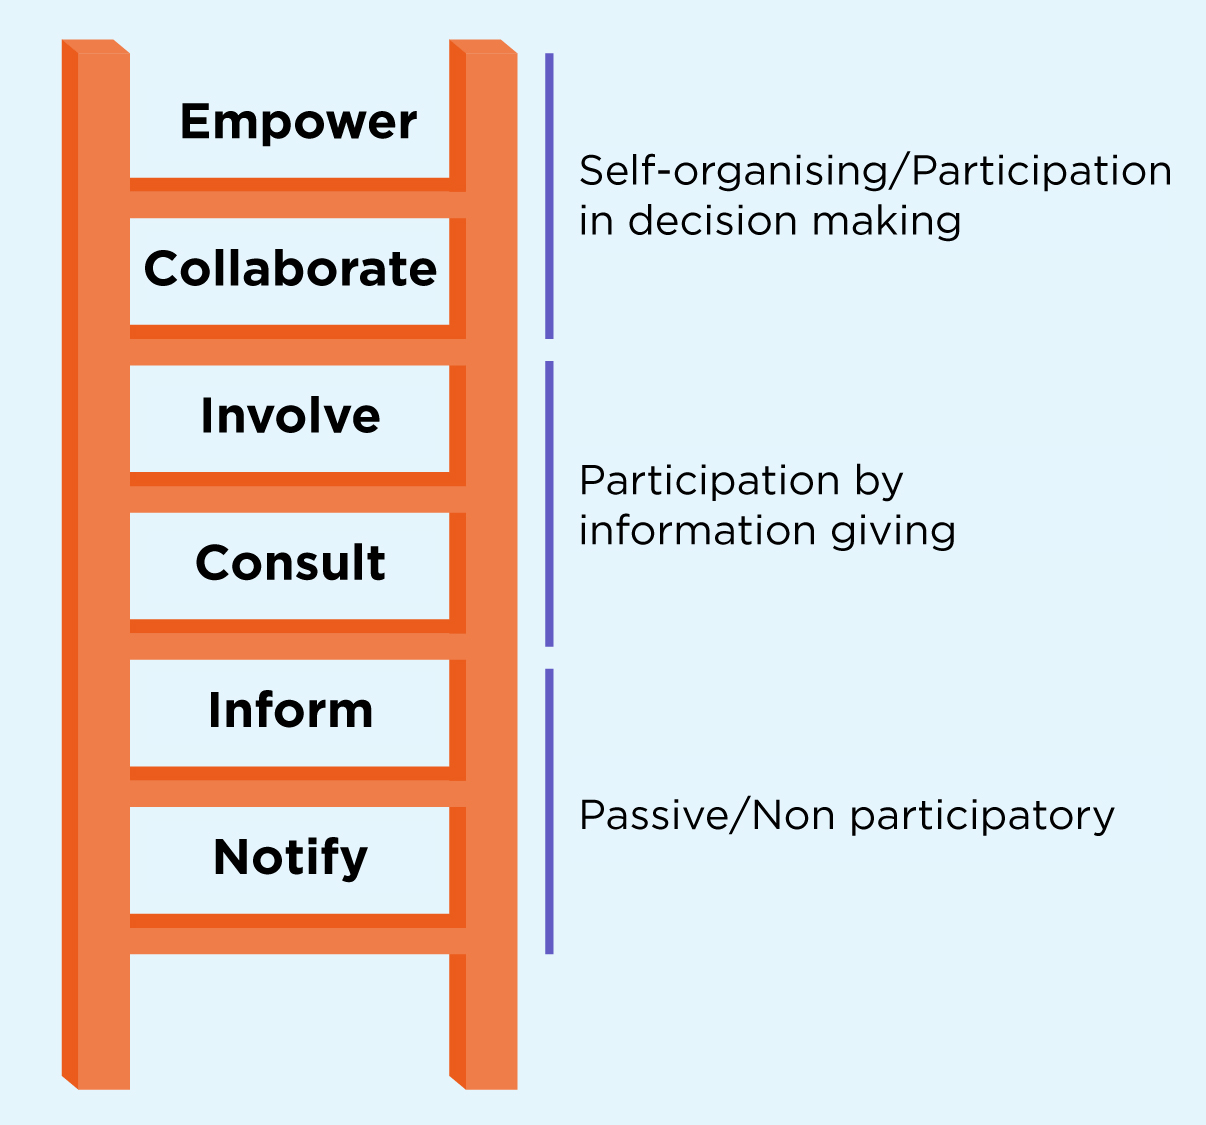 Arnstein, S.R. (1969): A Ladder Of Citizen Participation, Journal of the American Institute of Planners, 35:4, 216-224 [Available online http://dx.doi.org/10.1080/01944366908977225 Accessed 2nd August 2018].